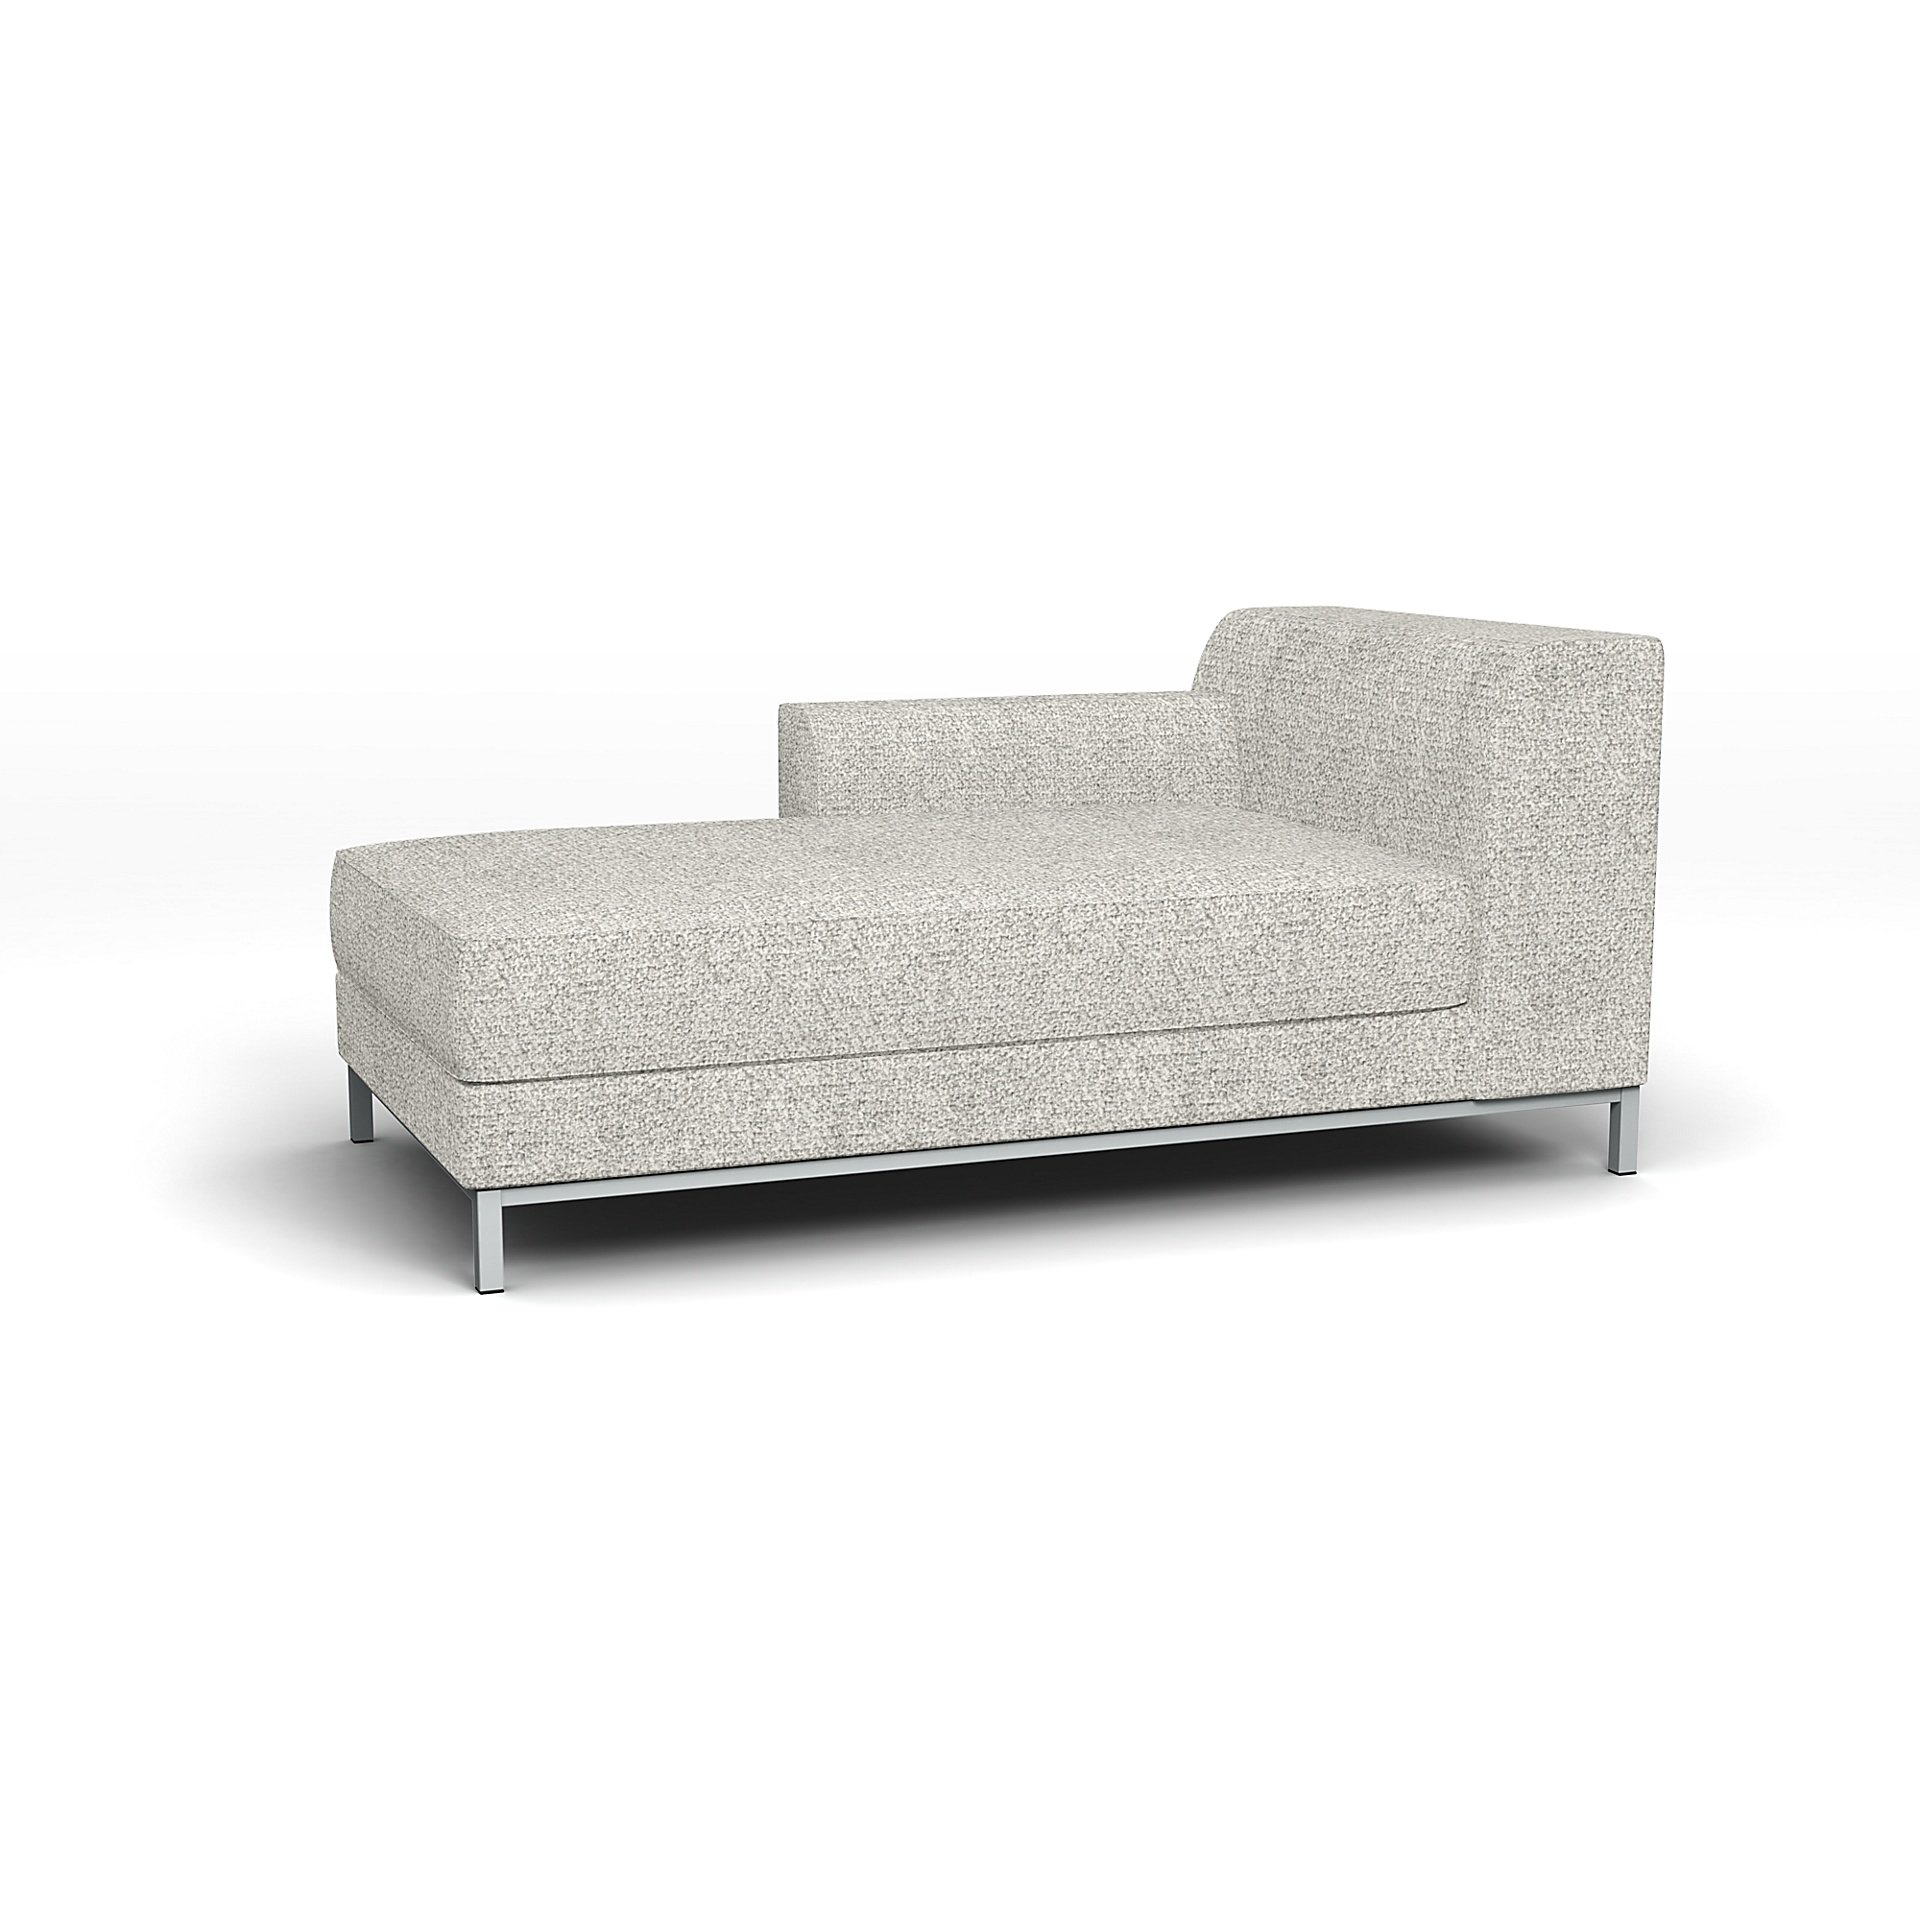 IKEA - Kramfors Chaise Longue with Left Arm Cover, Driftwood, Boucle & Texture - Bemz